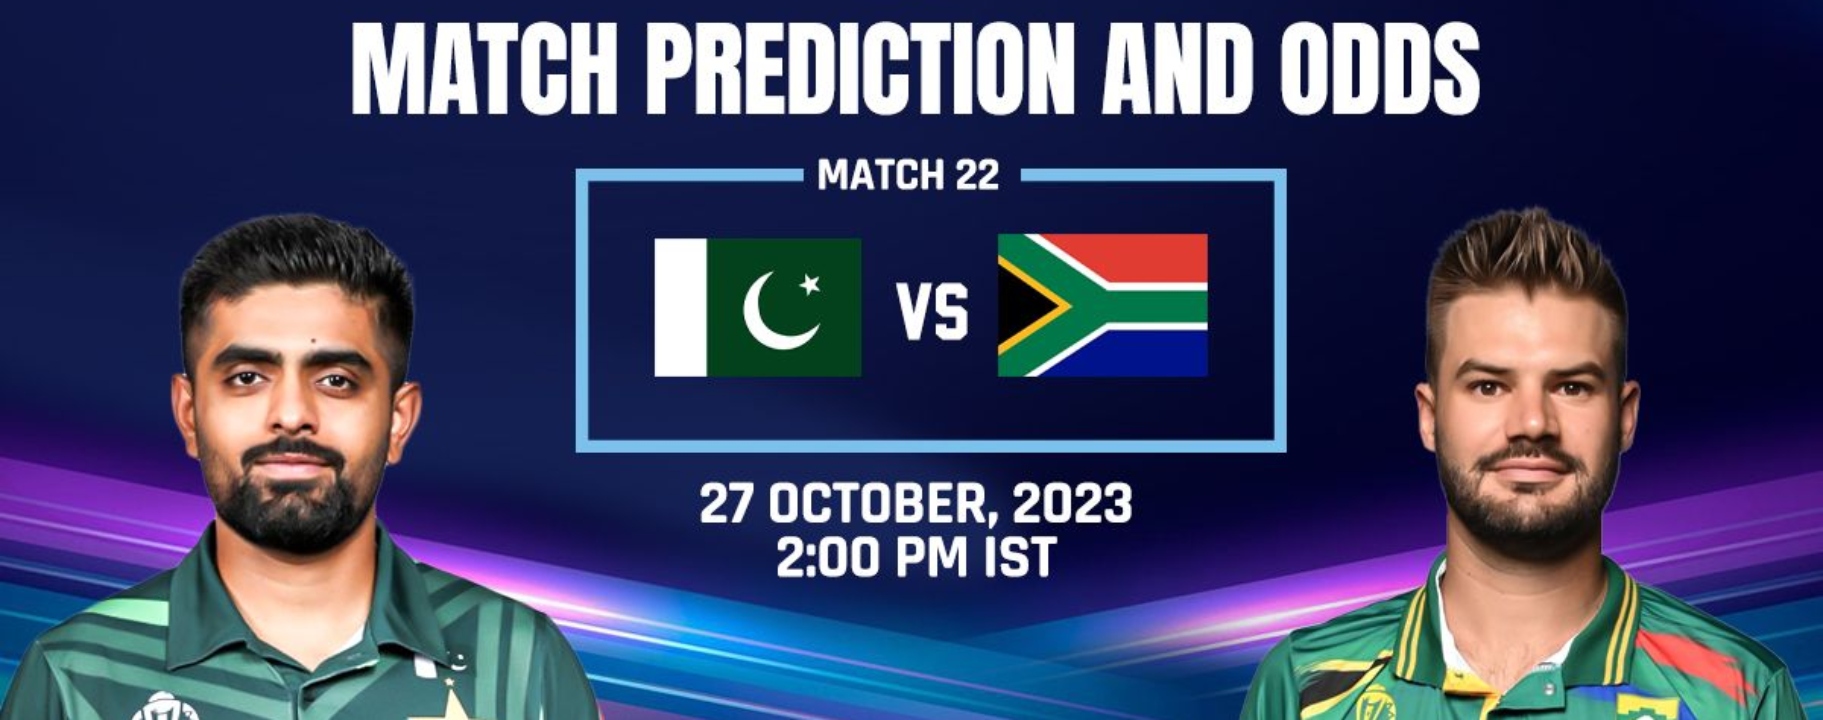 PAK vs SA Match Prediction_ Highest Scorer and Wicket takers, Match 26, ICC Cricket World Cup 2023